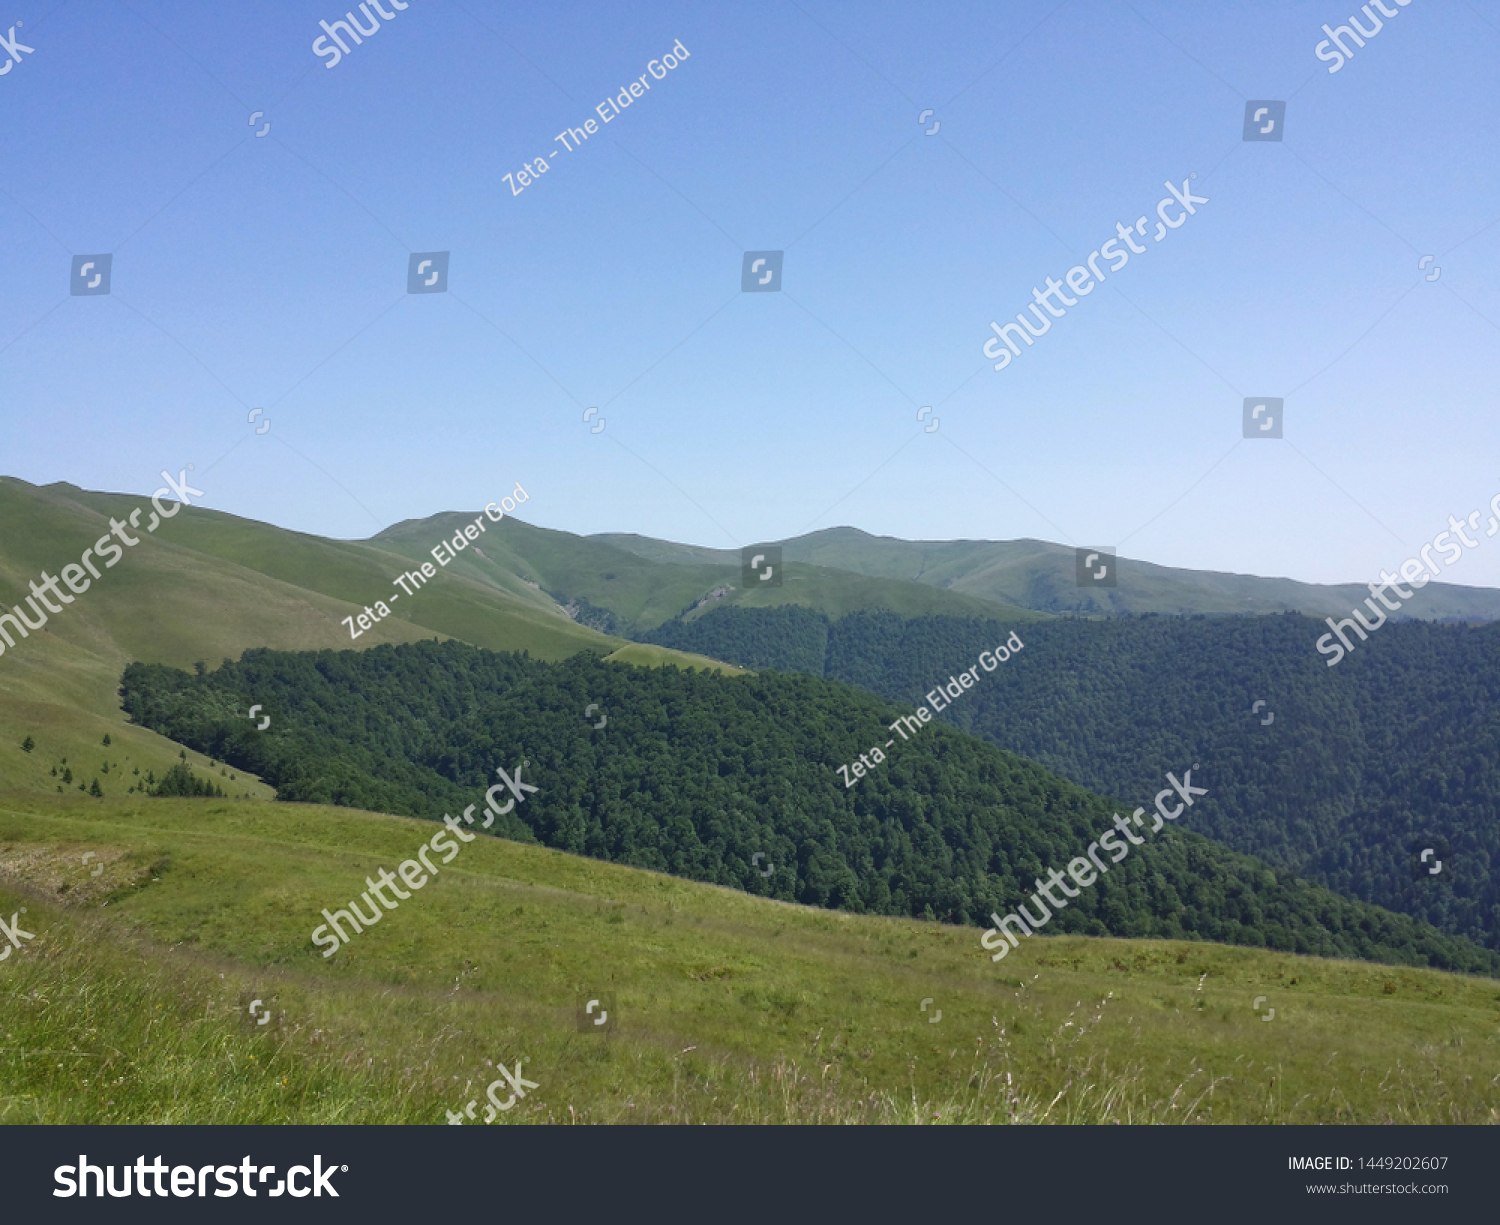 beautiful contrastis captured by me in this photo while hiking in the Carpathian Mountains #1449202607